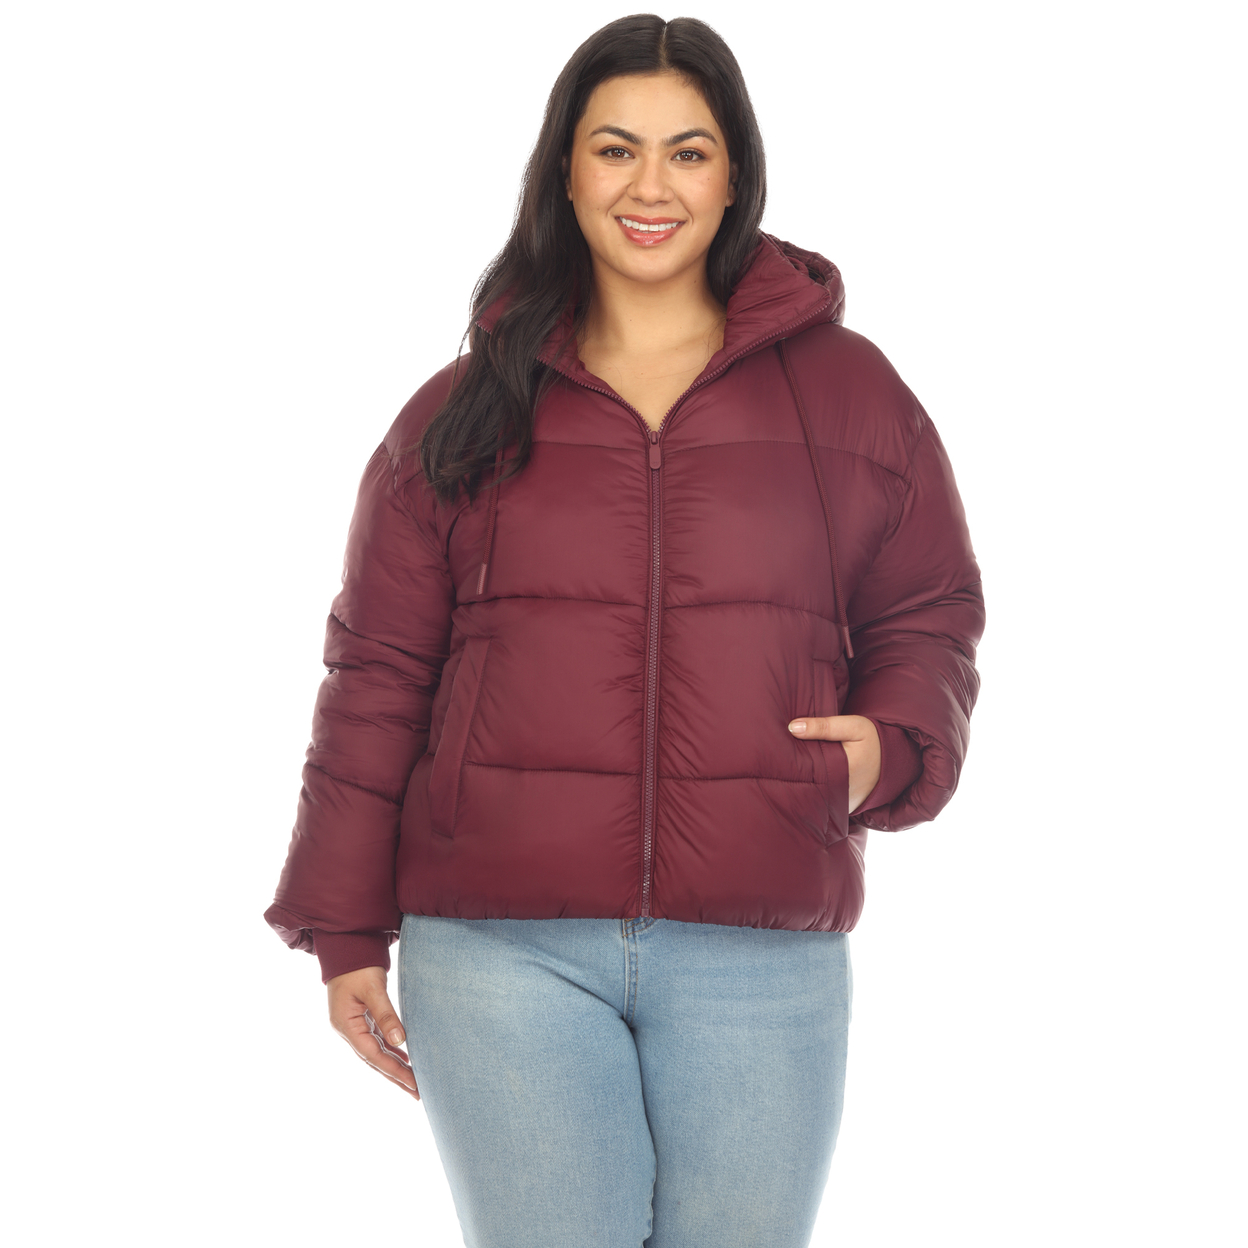 White Mark Women's Zip Hooded Puffer Jacket With Pockets - Burgundy, 2x